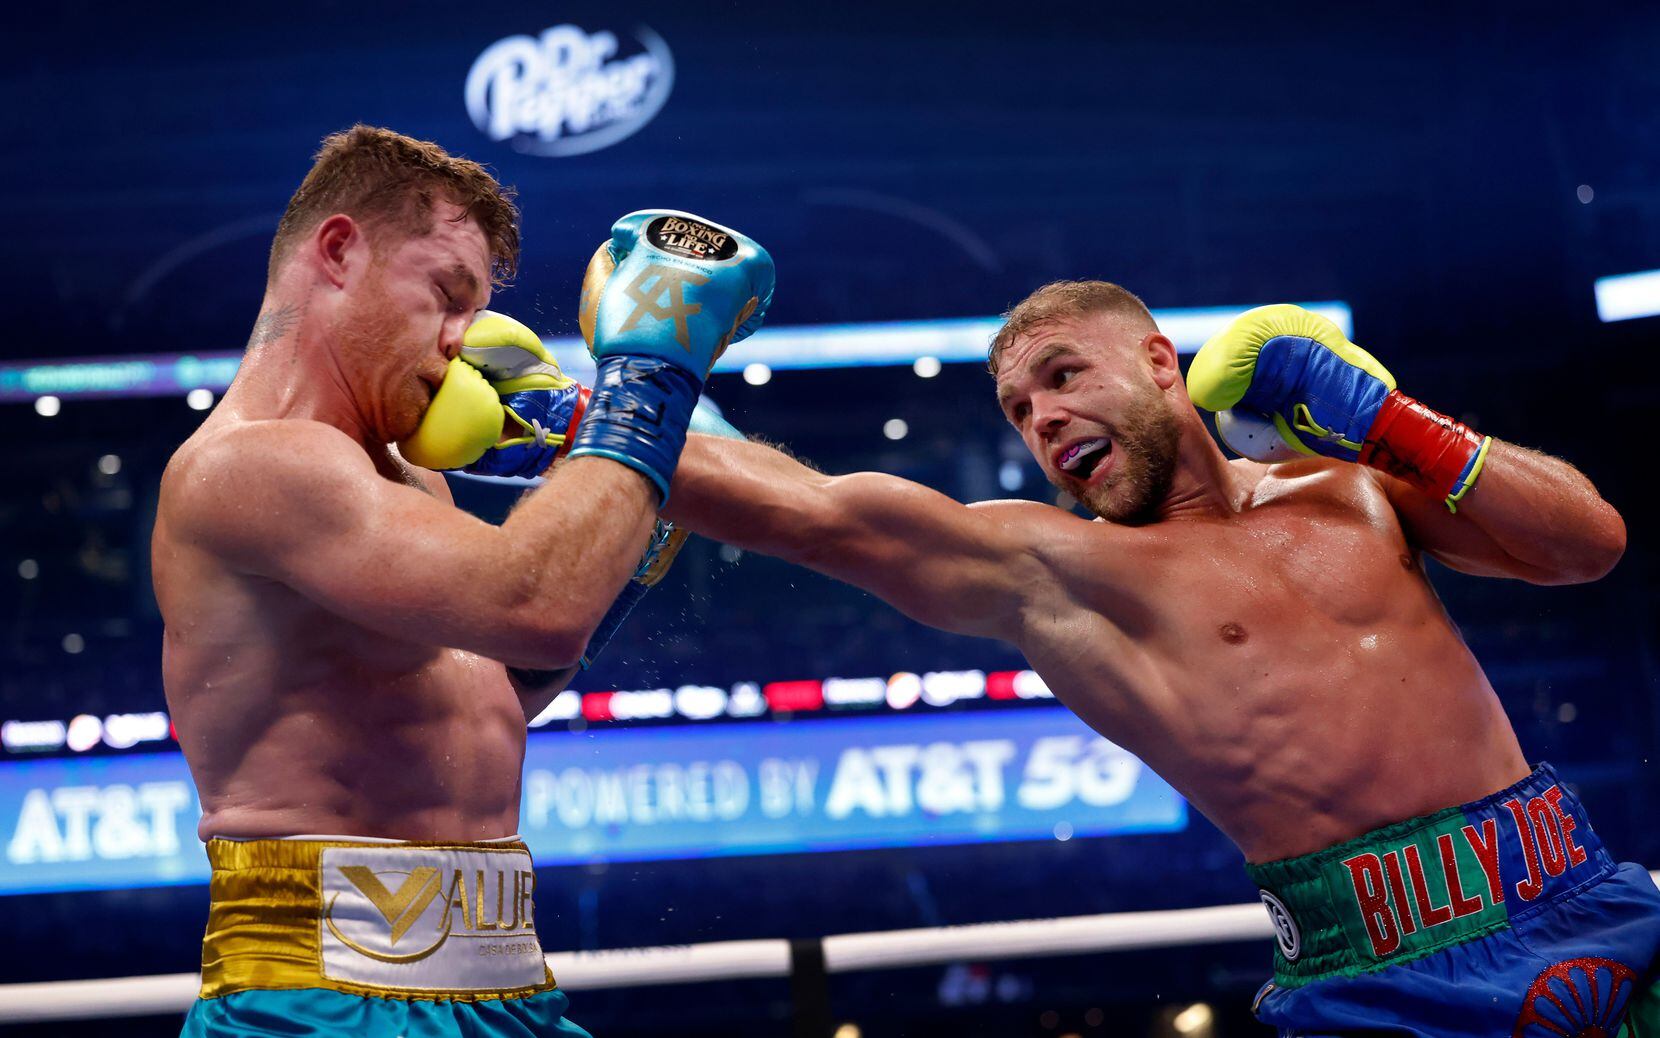 Billy Joe Saunders (right) got a clean shot to the face of Canelo Alvarez during their super middleweight title fight in Arlington. Alvarez won with an eighth-round TKO victory. The event was reminiscent of what live sports were like before the pandemic.